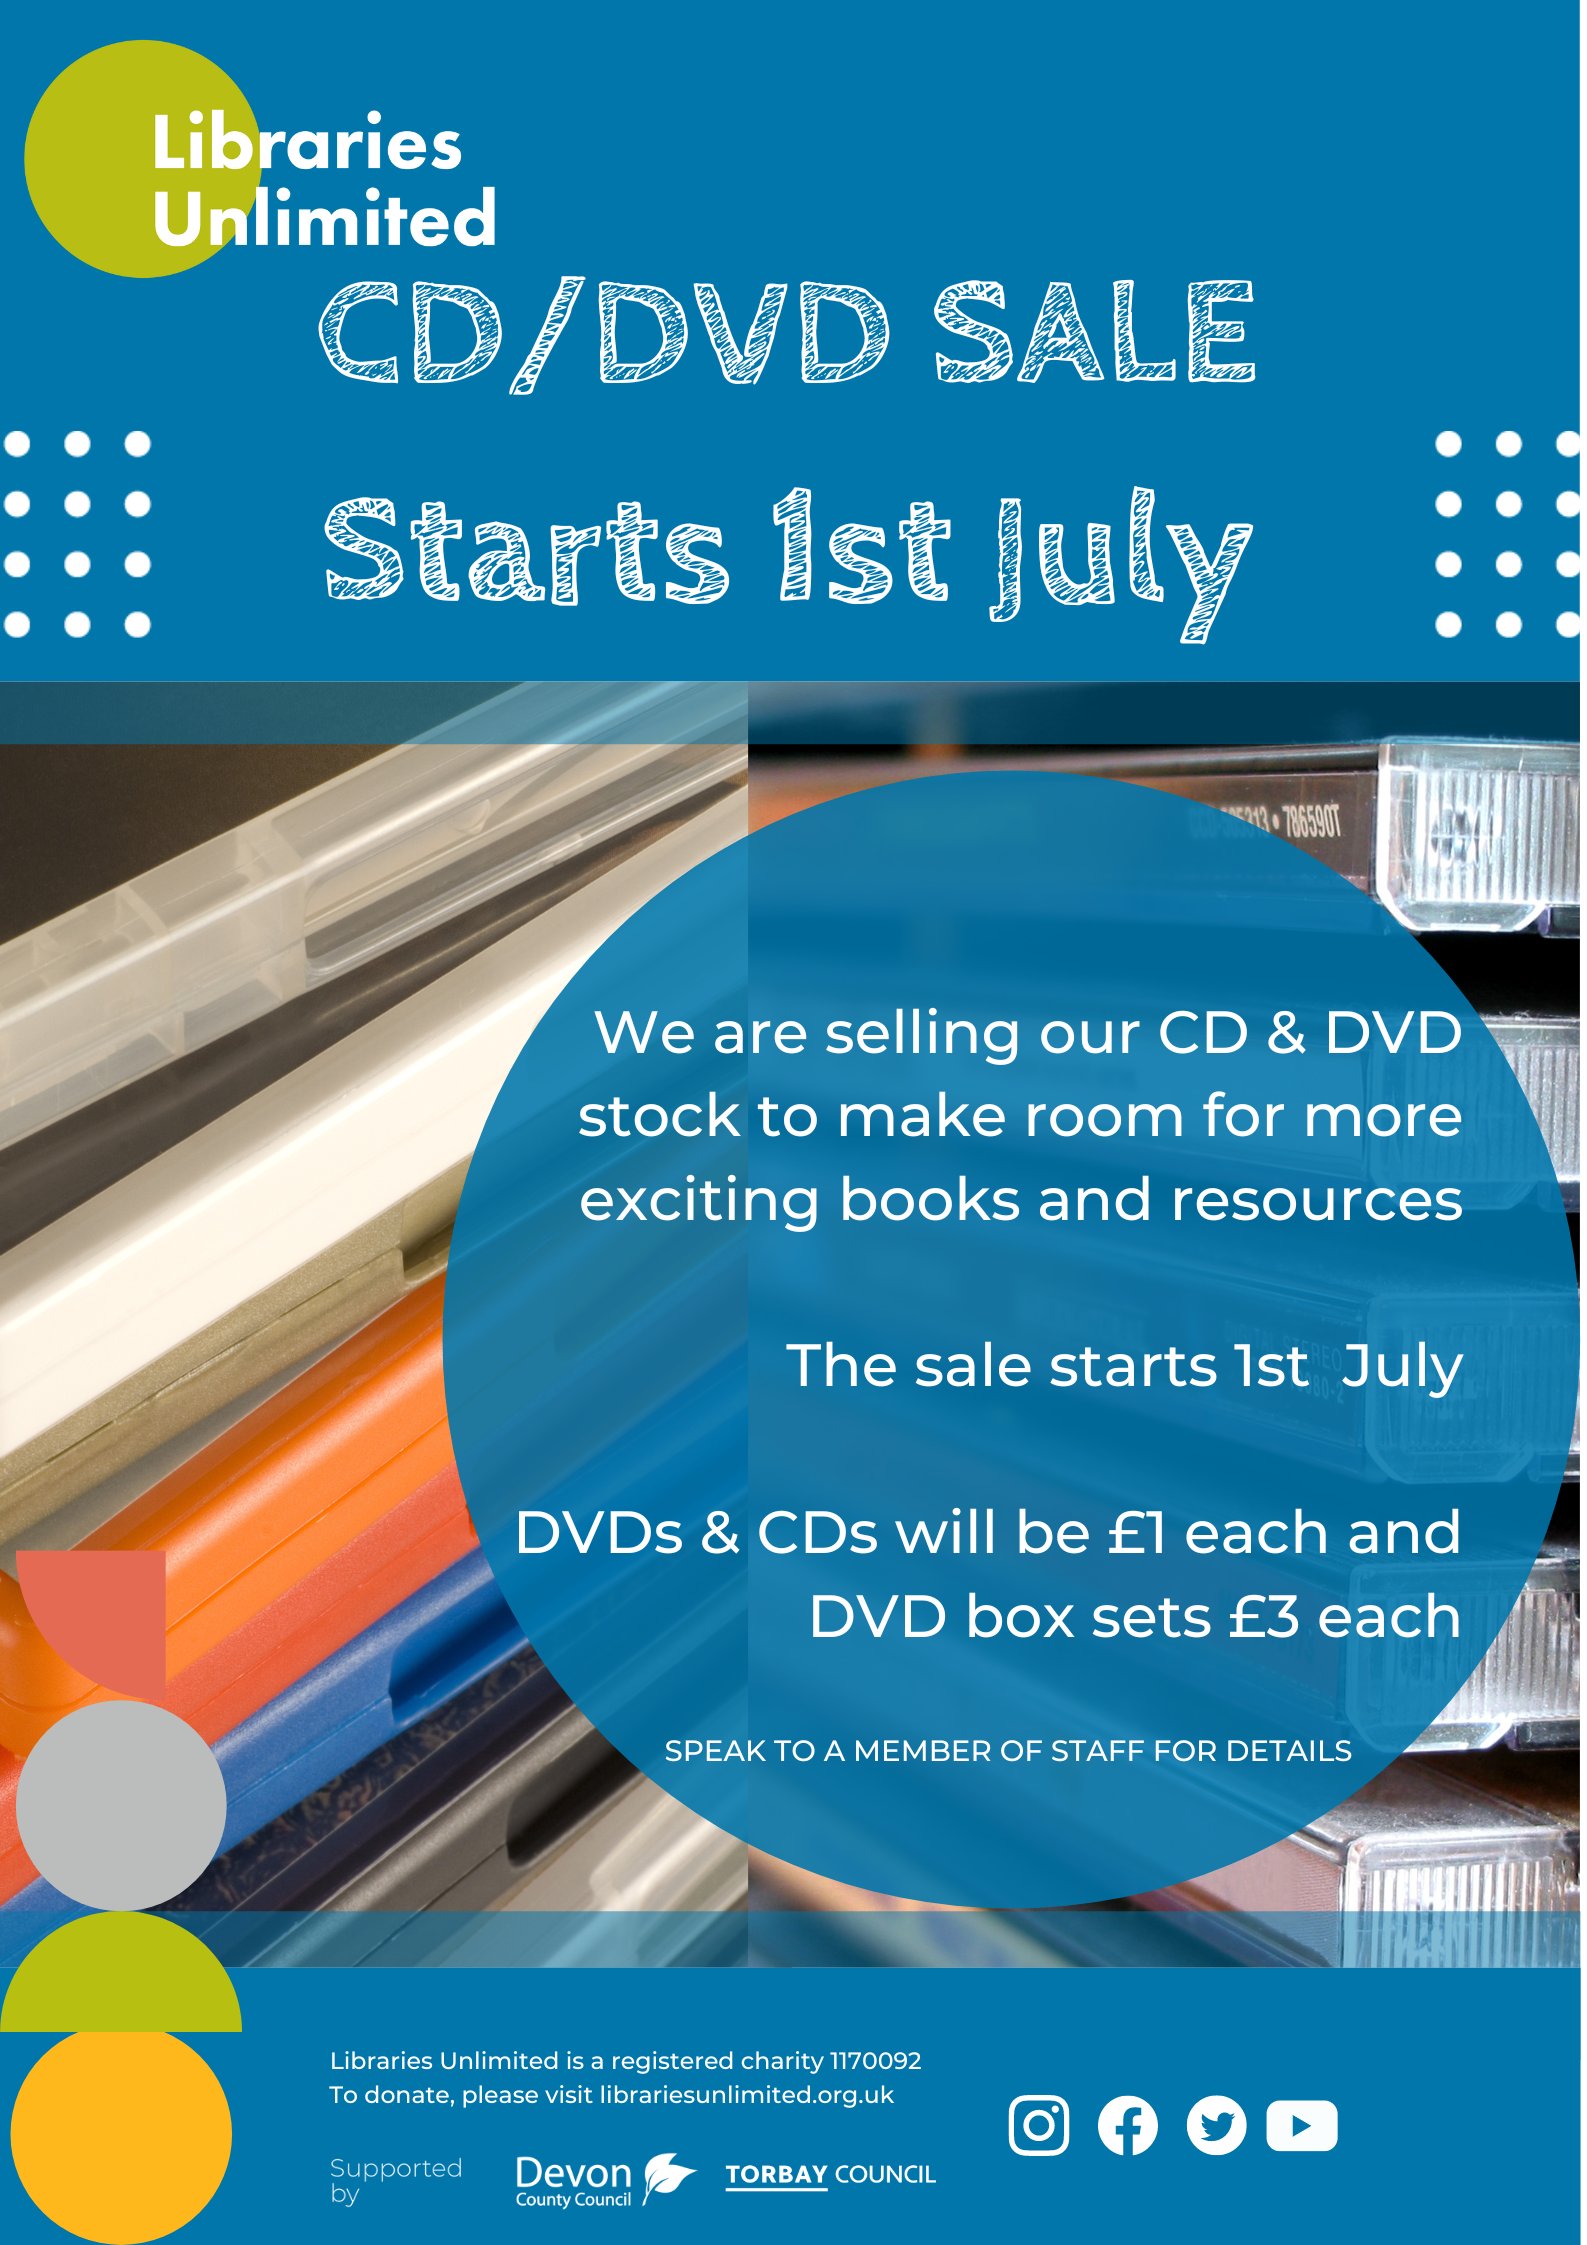 CDs and DVDs are being withdrawn by Libraries Unlimited. From Friday 1st July, our stock at Exeter Library will be available to purchase.